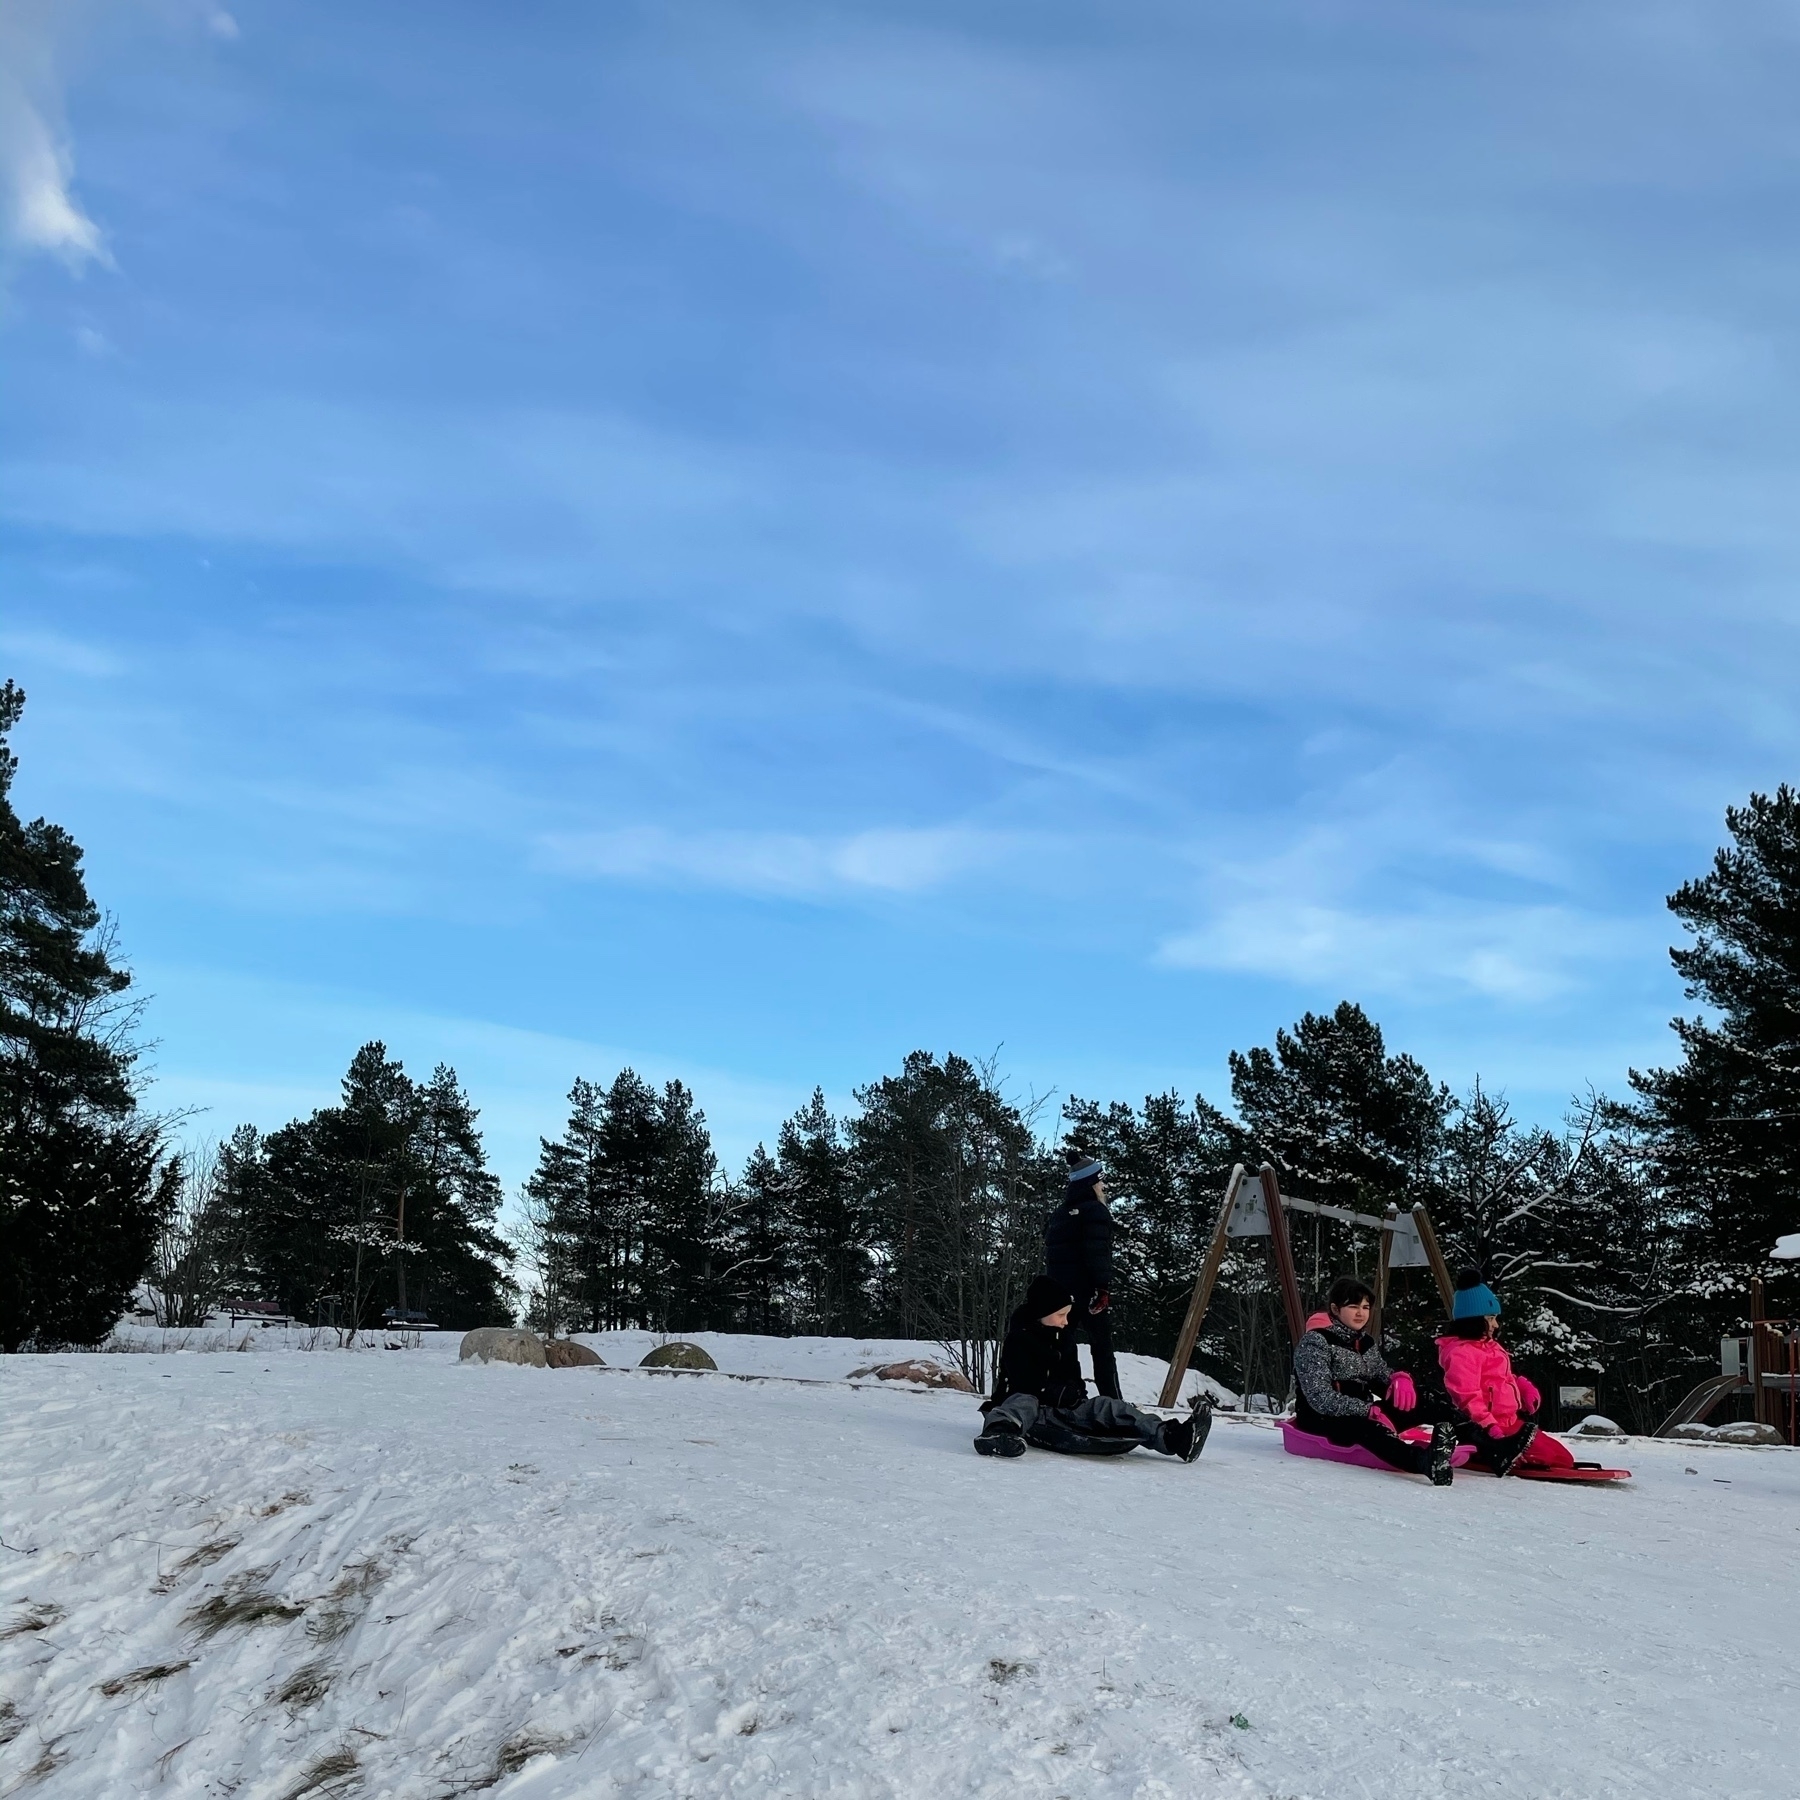 multiple kids waiting for their turn to slide down the hill